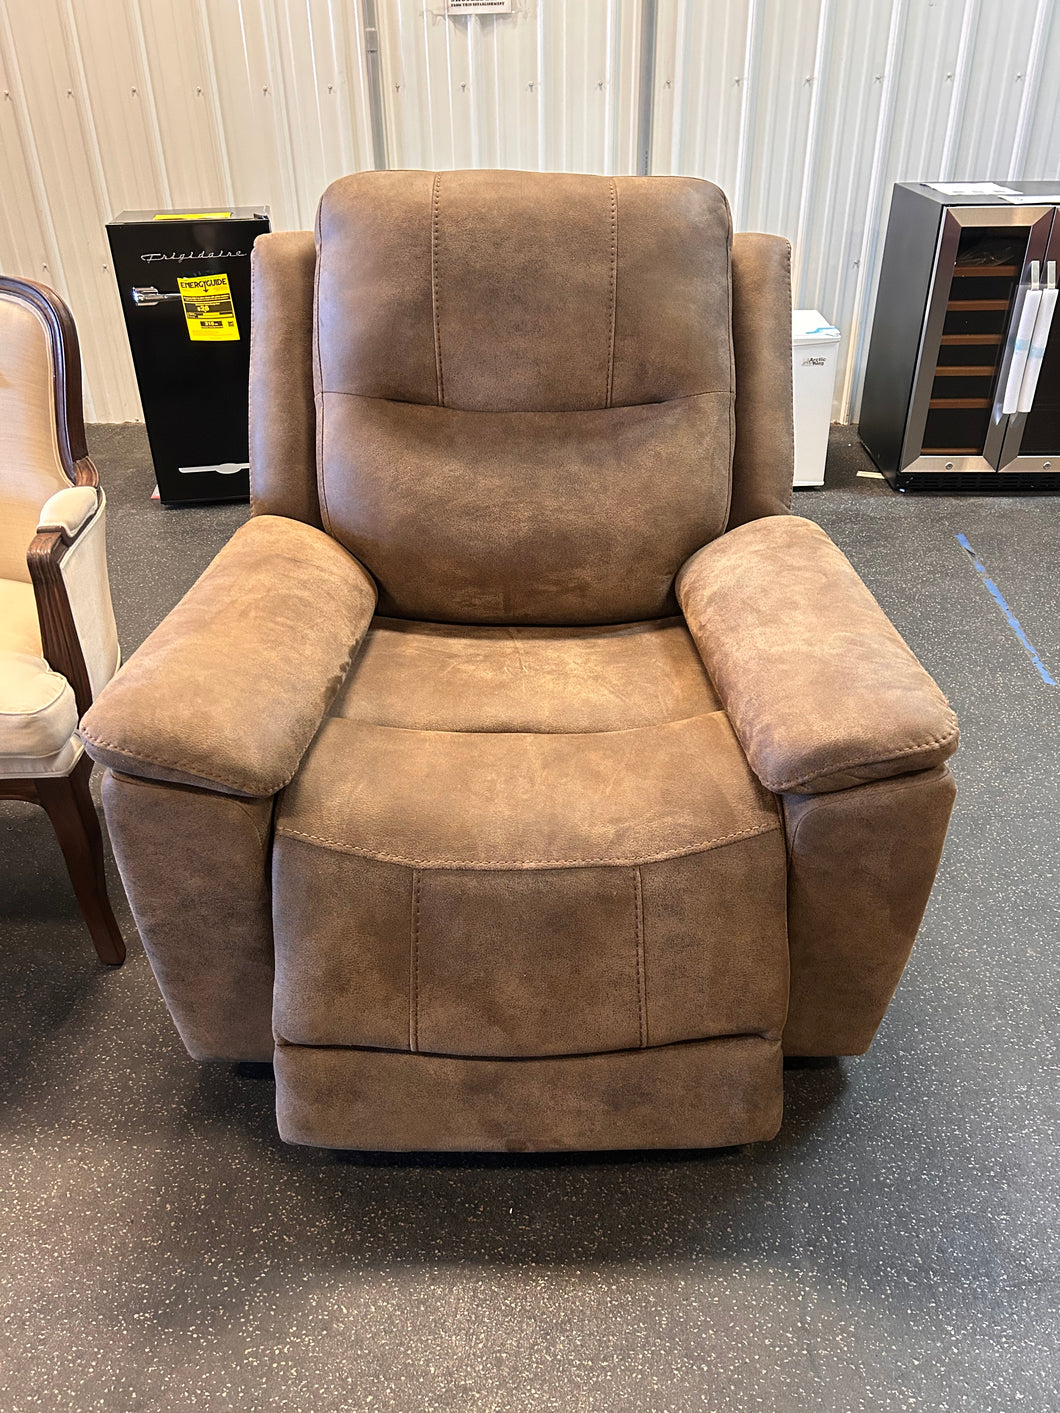 SALVAGE SPECIAL - Barcalounger Fabric Chair! (NEW - MISSING ELECTRONICS - NO POWER - DOES NOT RECLINE!)